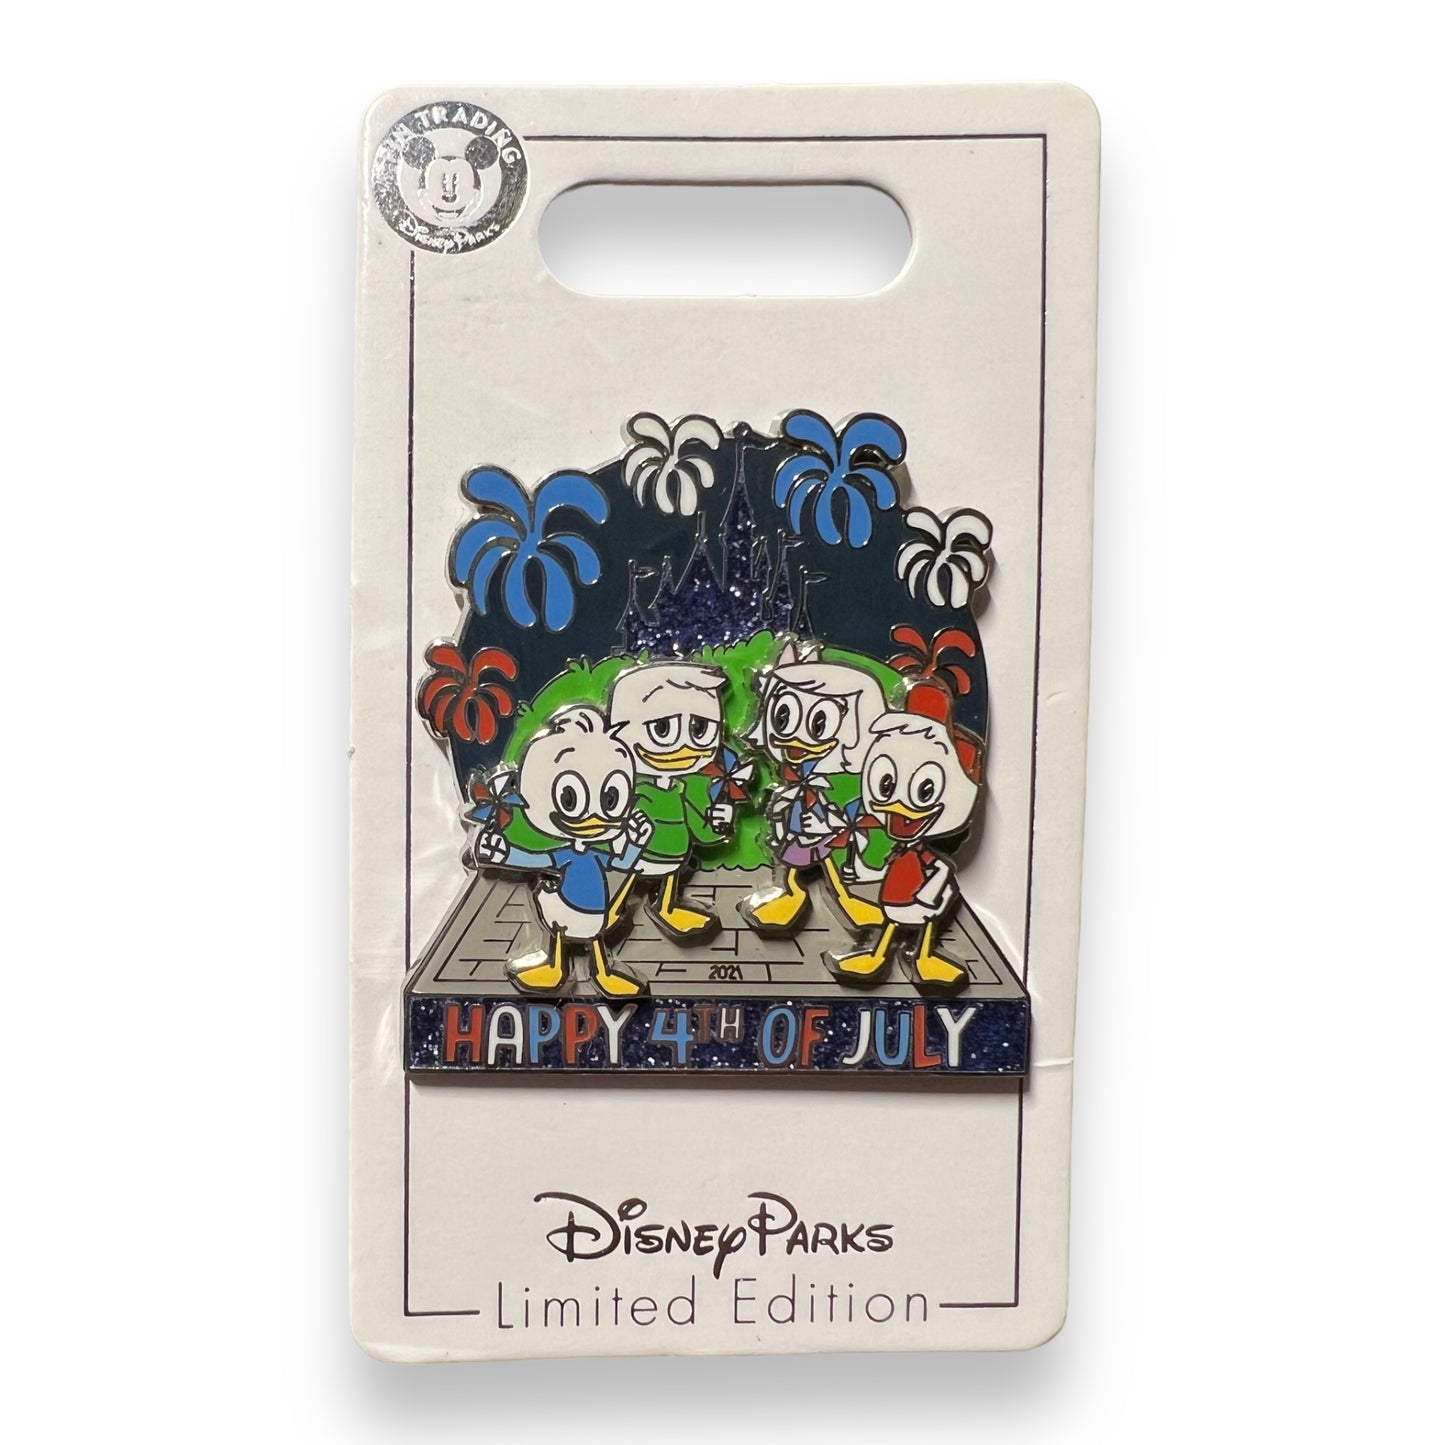 Ducktales "Independence Day" (DLR) Pin